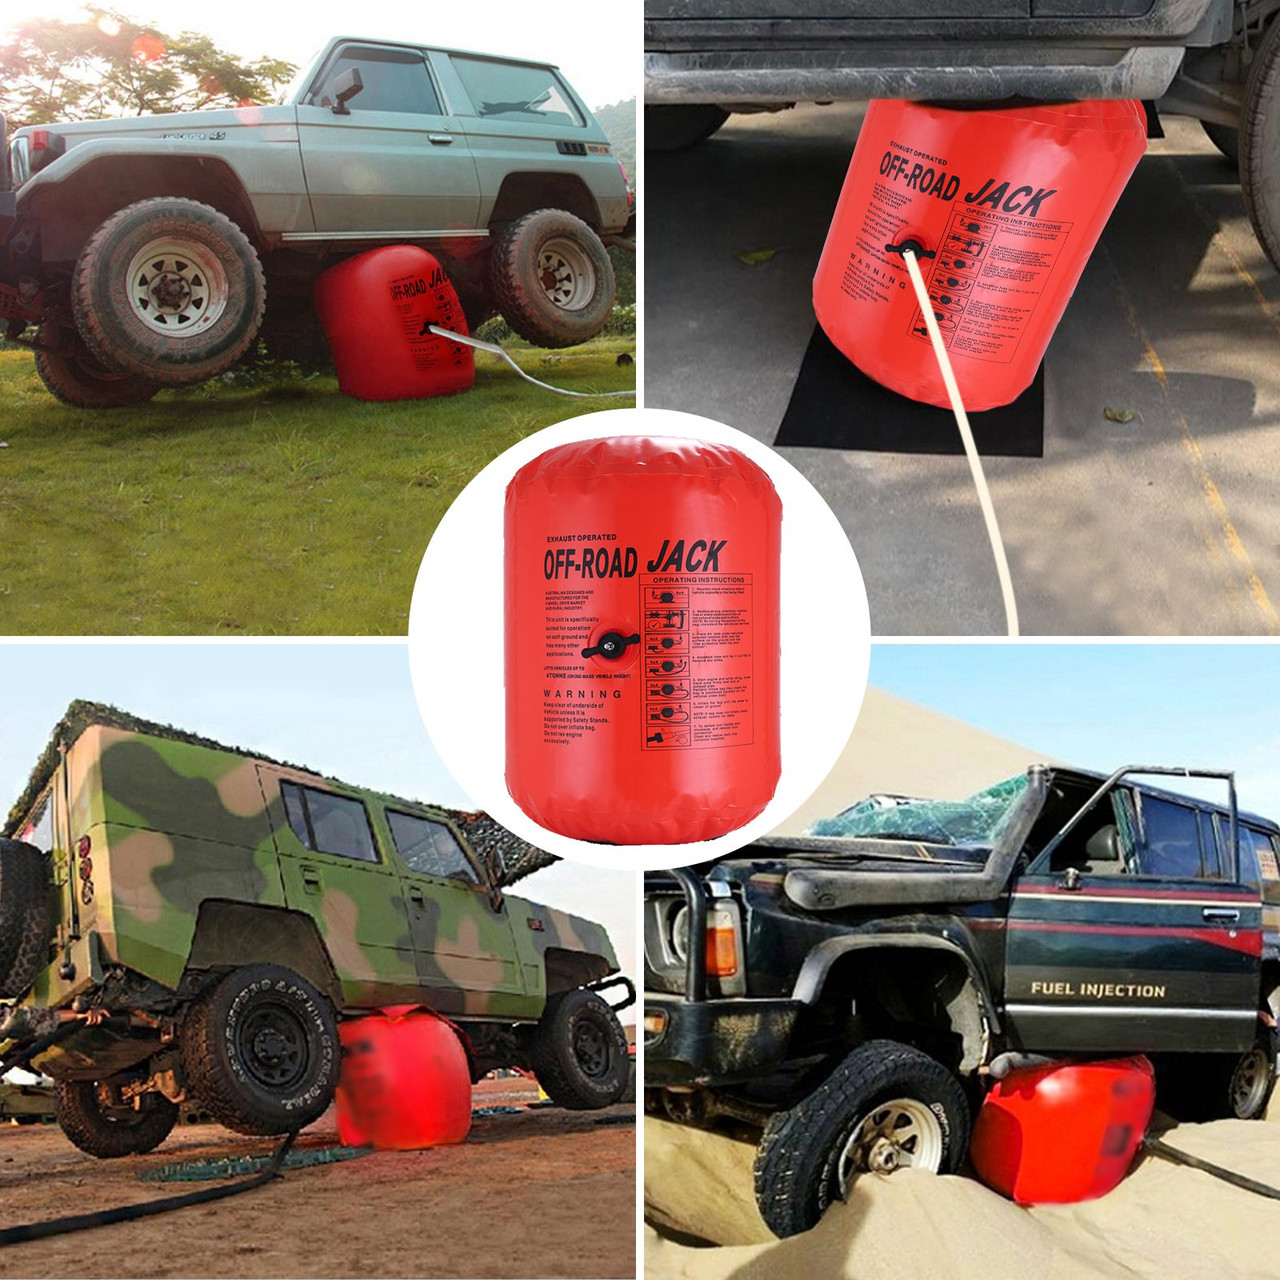 Air Jack Exhaust 4x4 Off Road 4 Tonne Lift Capacity Most Durable Hose Extension